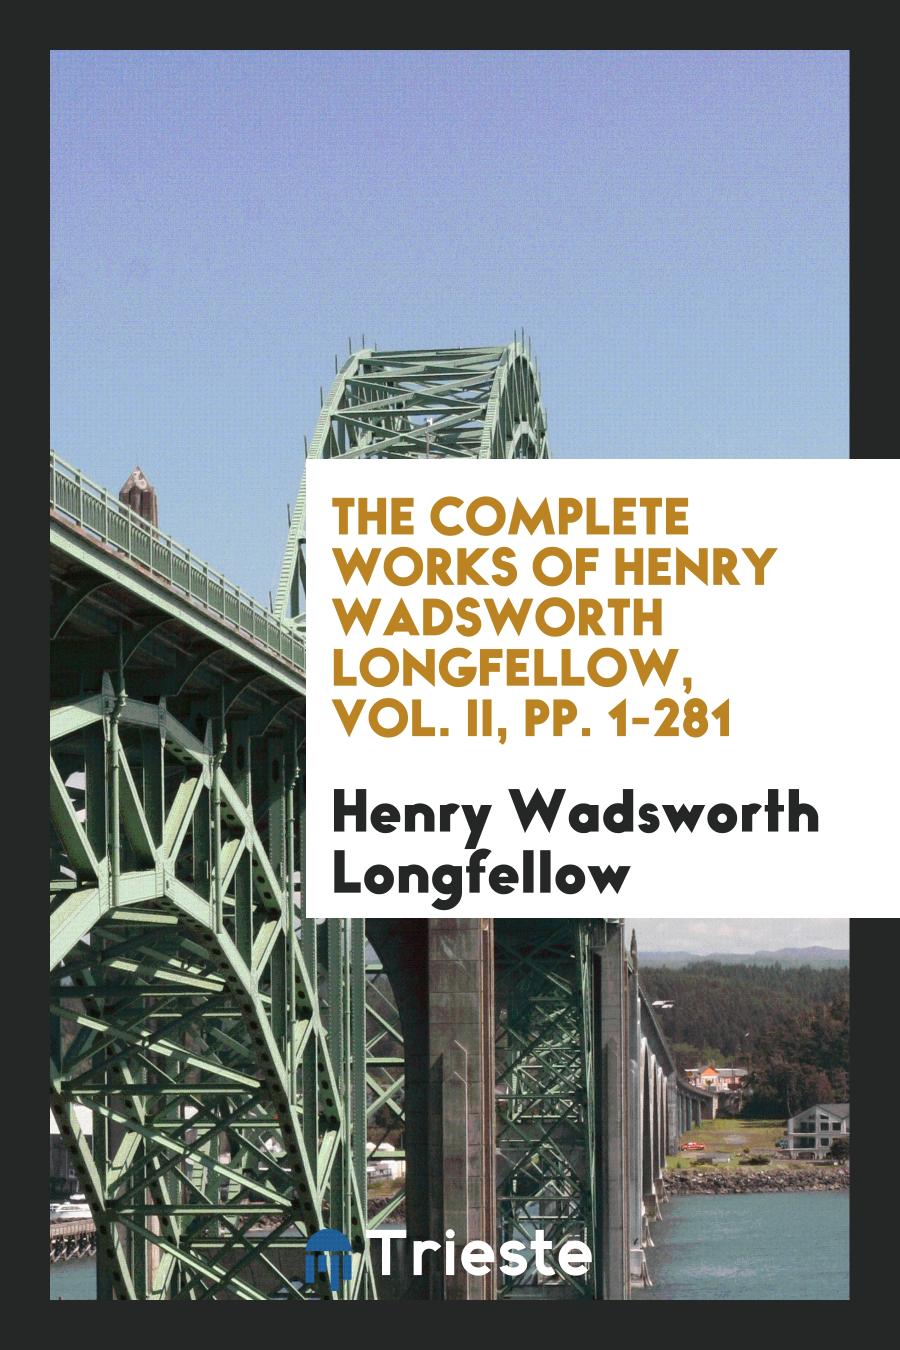 The Complete Works of Henry Wadsworth Longfellow, Vol. II, pp. 1-281